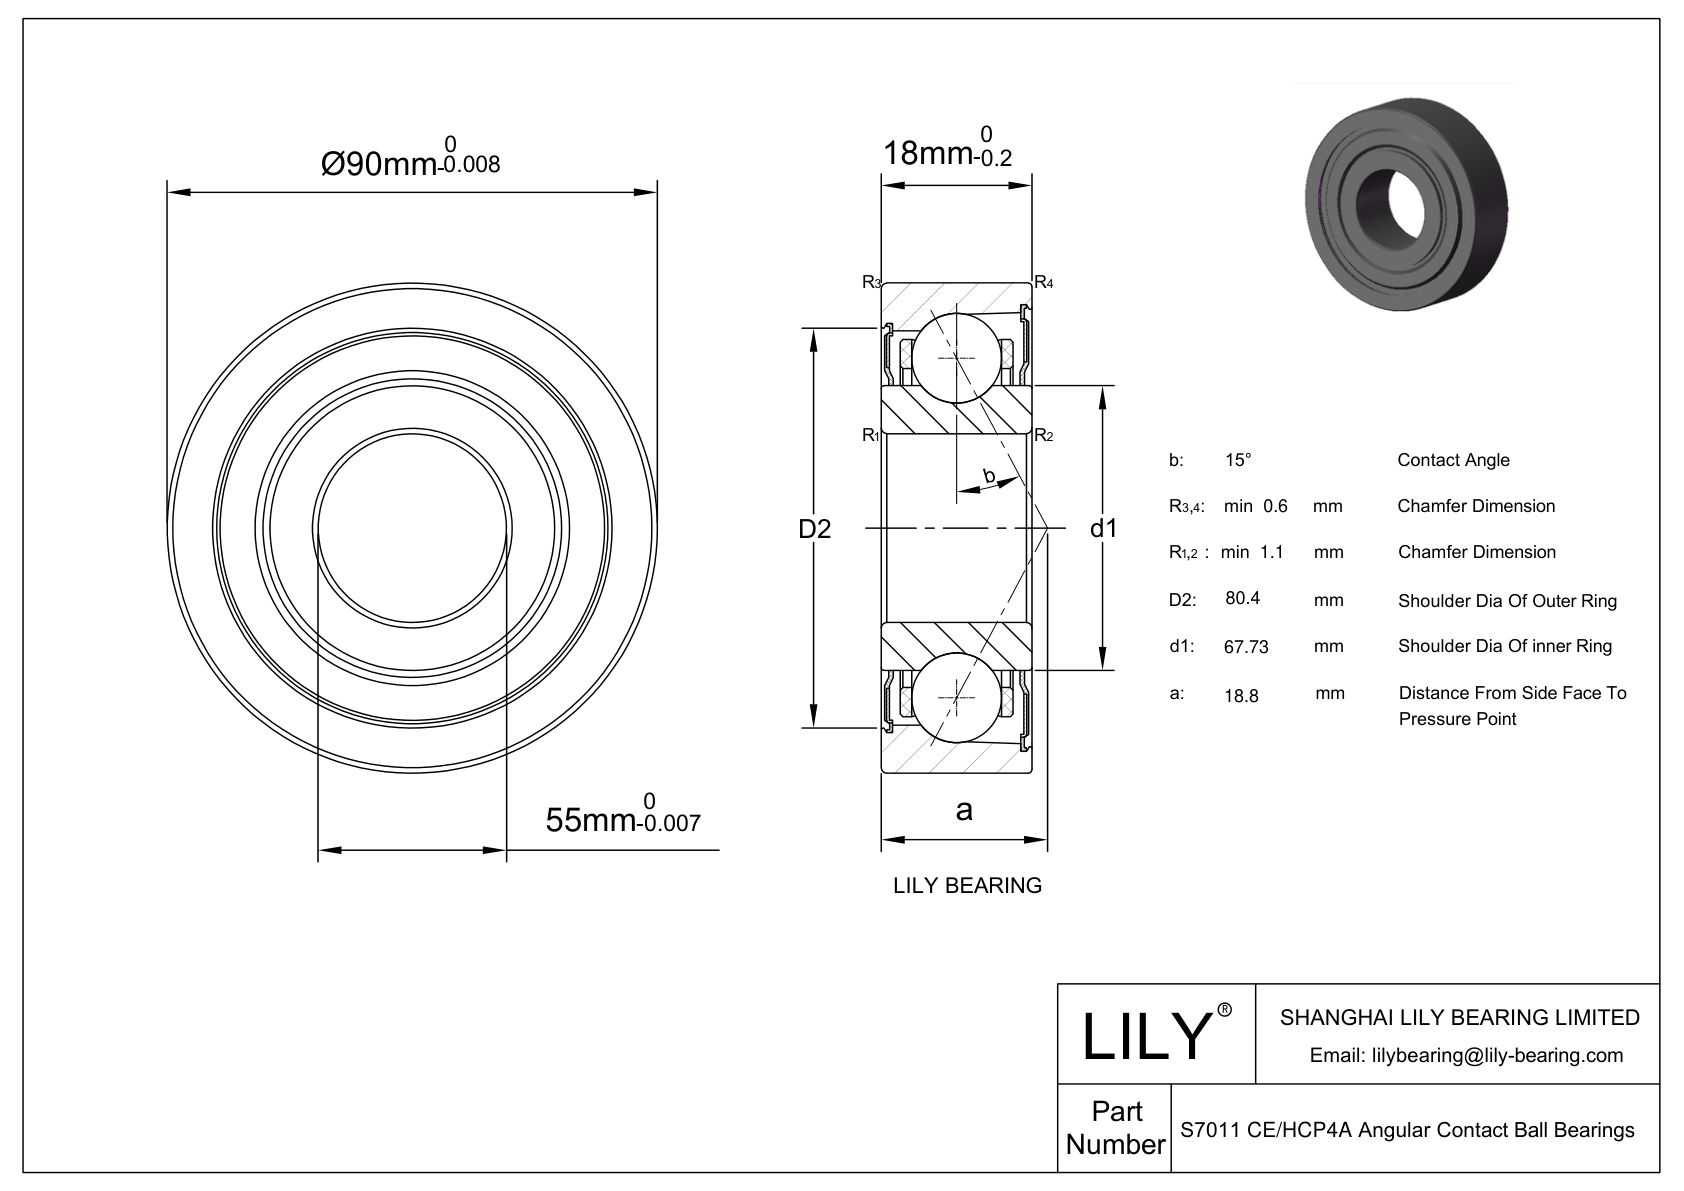 S7011 CE/HCP4A Super Precision Angular Contact Ball Bearings cad drawing